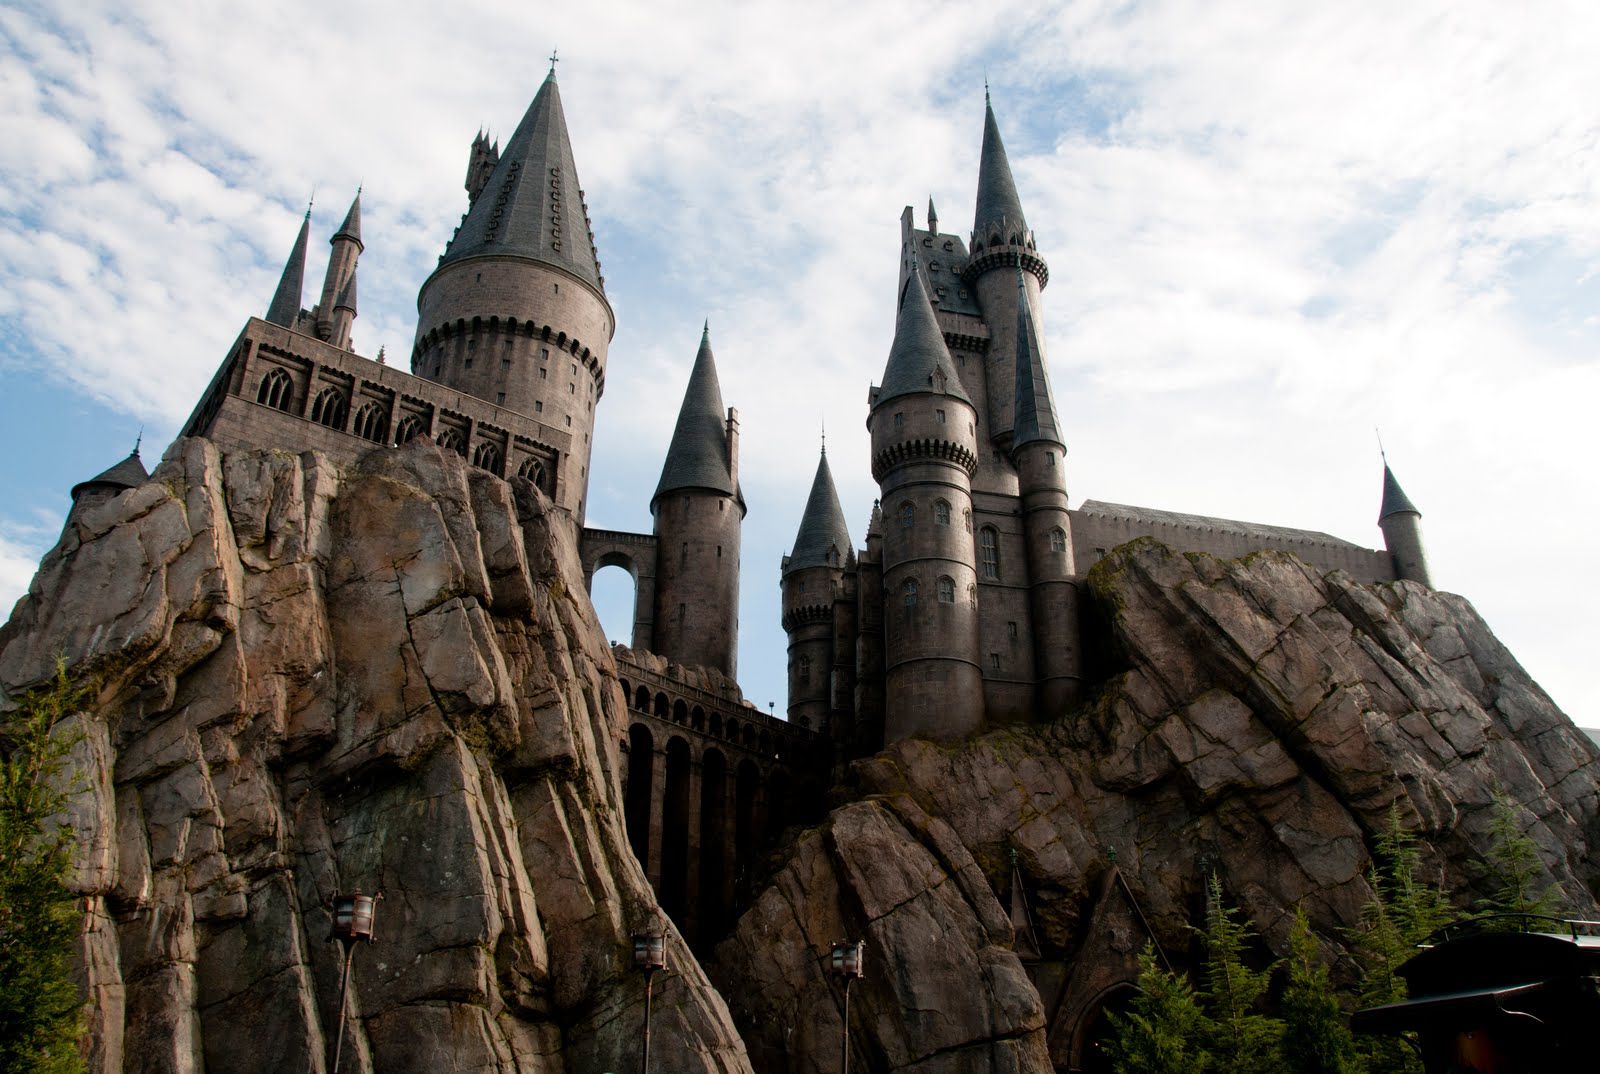 Harry Potter land at Universal....and also where the real filming was